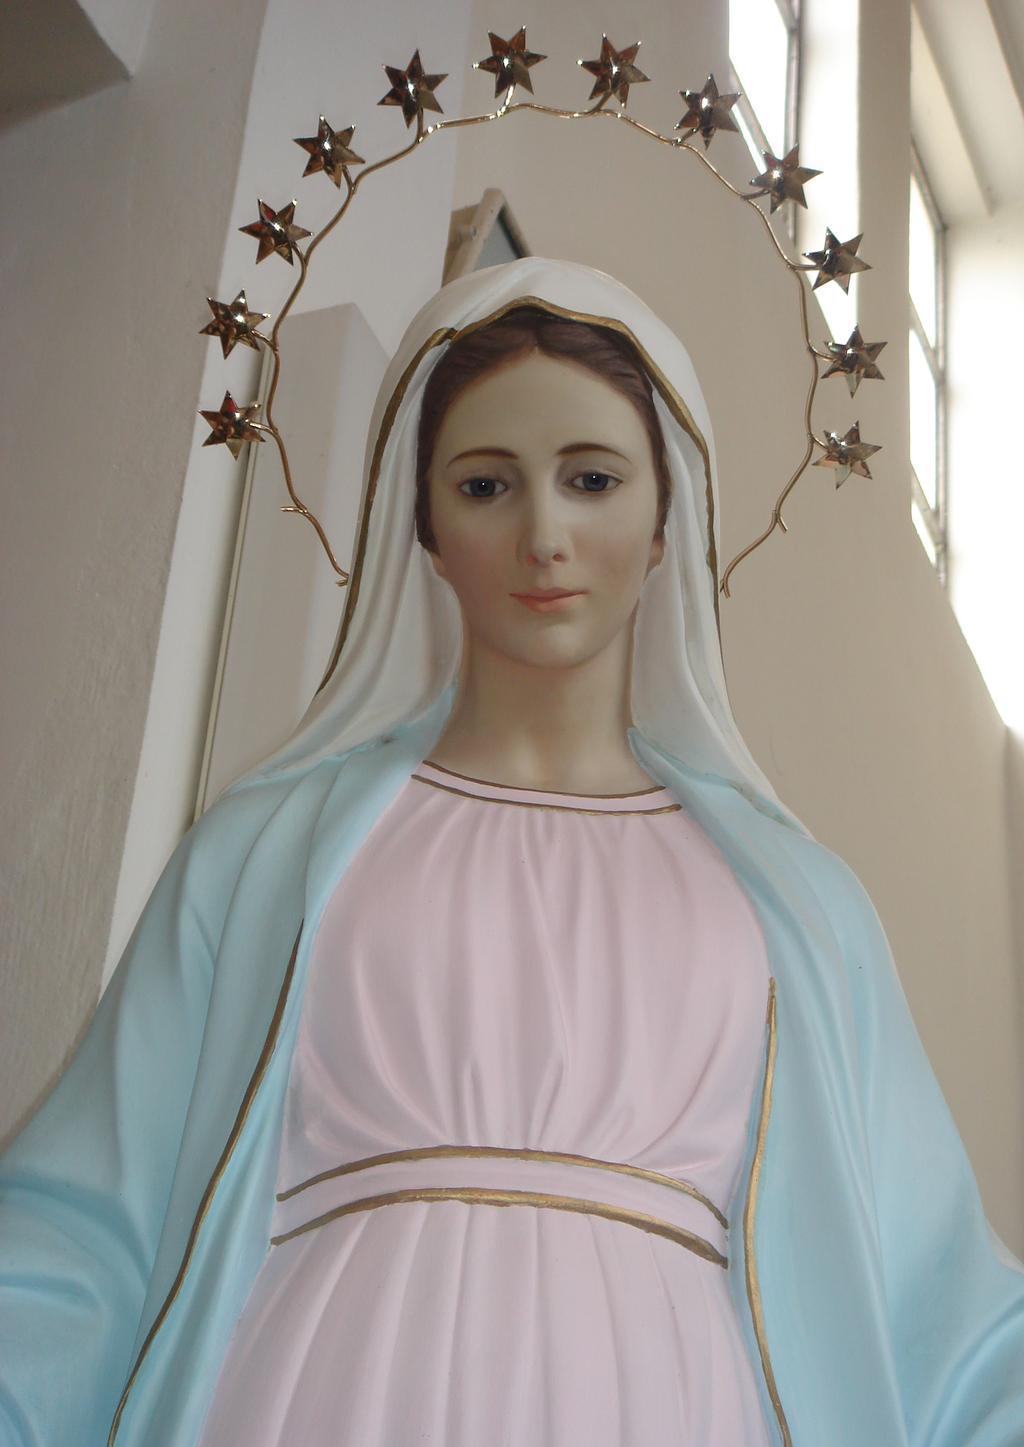 MEDJUGORJE MESSAGE Medjugorje is a favored place chosen by God in which the Holy Virgin Mary has appeared daily for nearly 30 years IN A SPECIAL WAY I HAVE CHOSEN THIS PARISH,